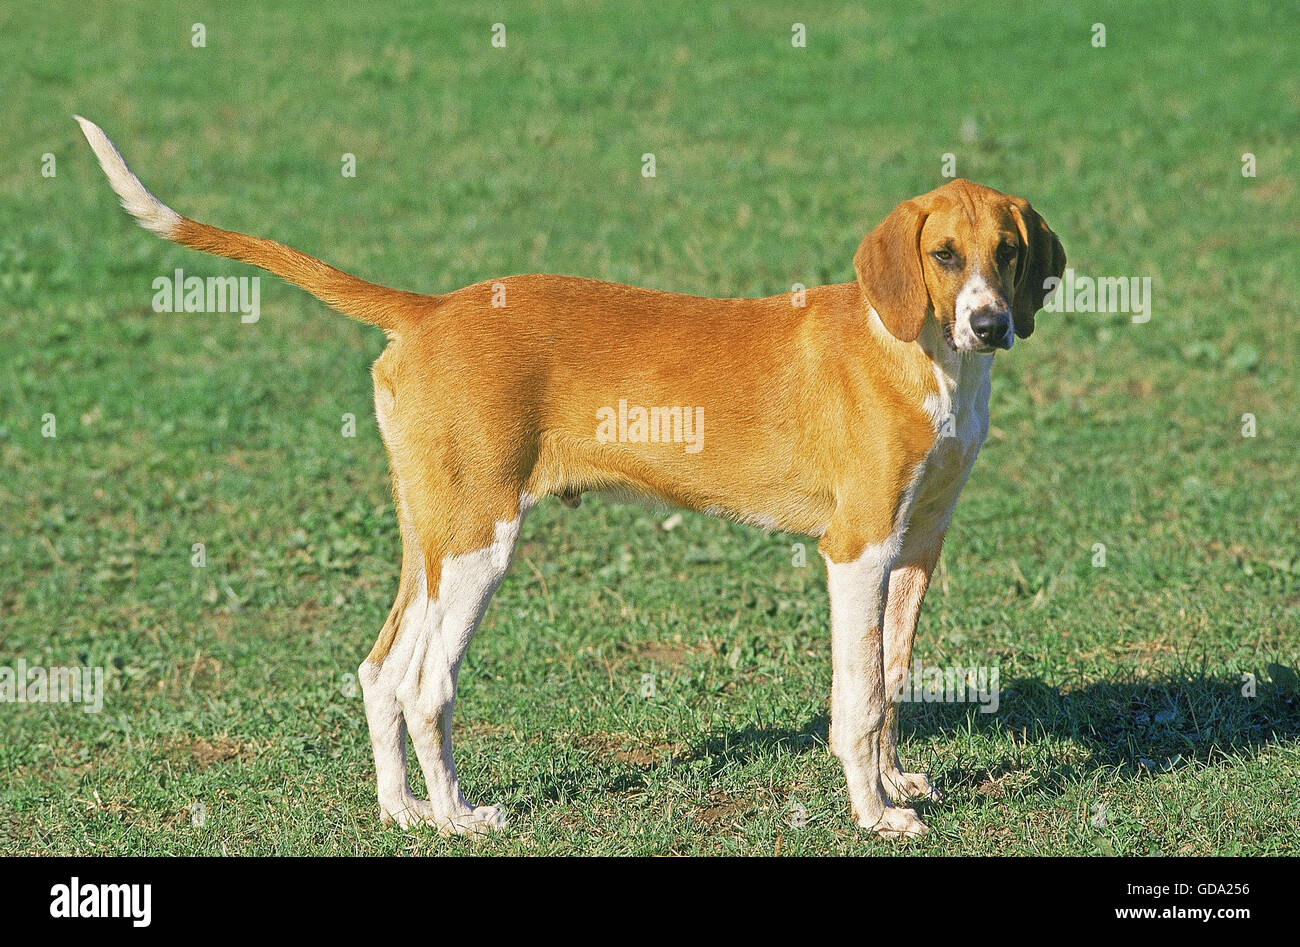 Poitevin Dog Male Standing On Grass Stock Photo Alamy